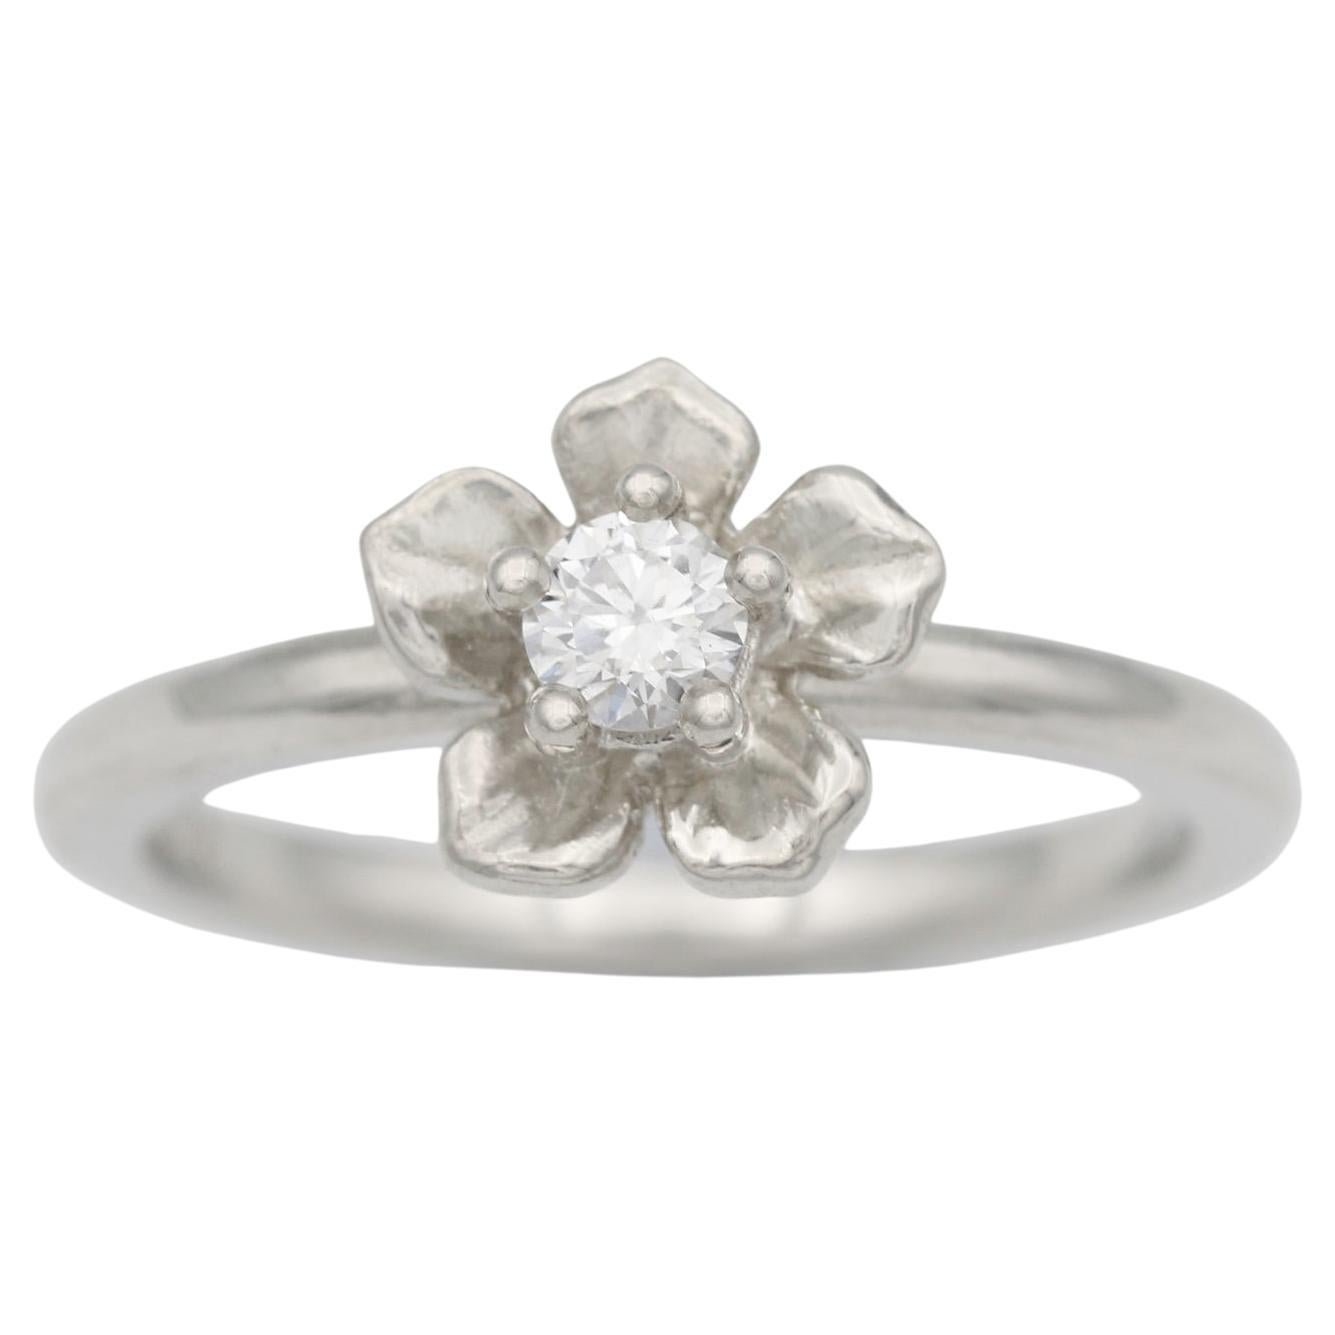 For Sale:  Forget Me Not Ring / 9ct White Gold, Diamond